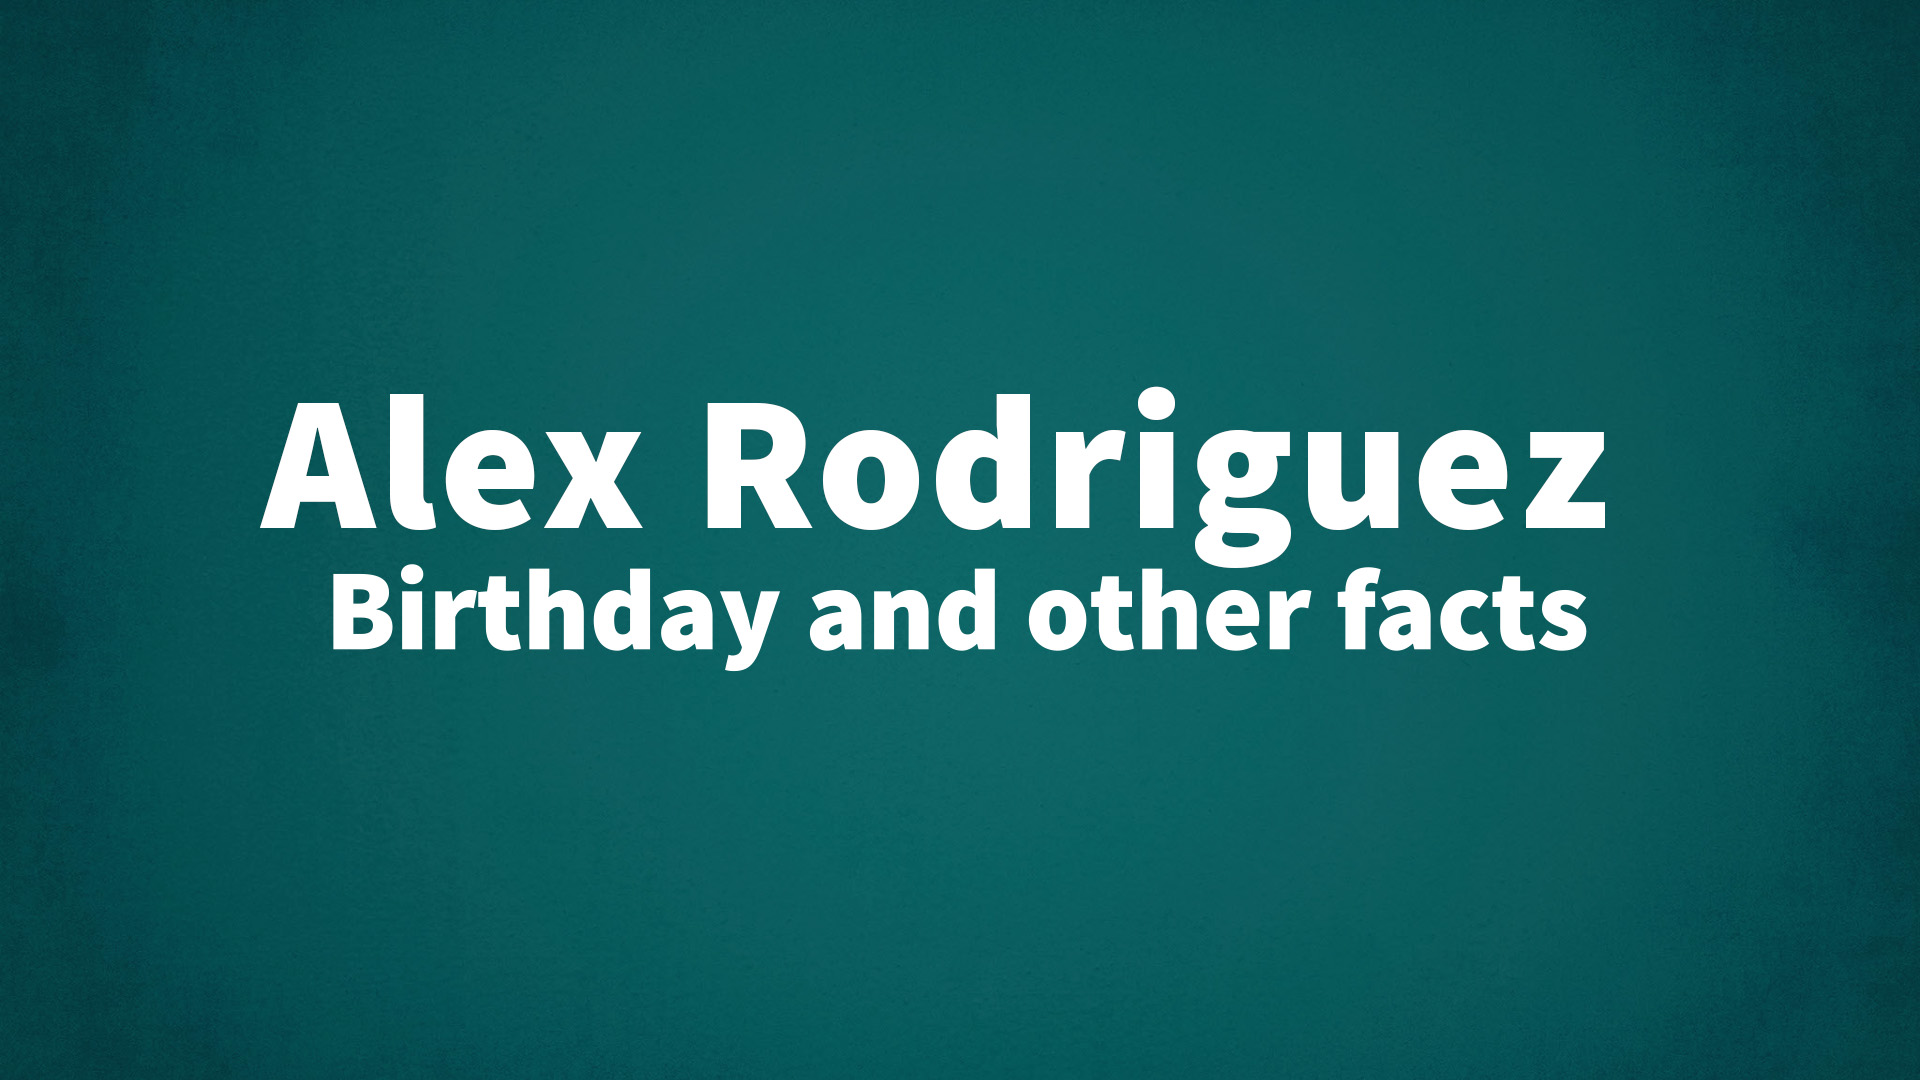 Alex Rodriguez - Birthday and other facts